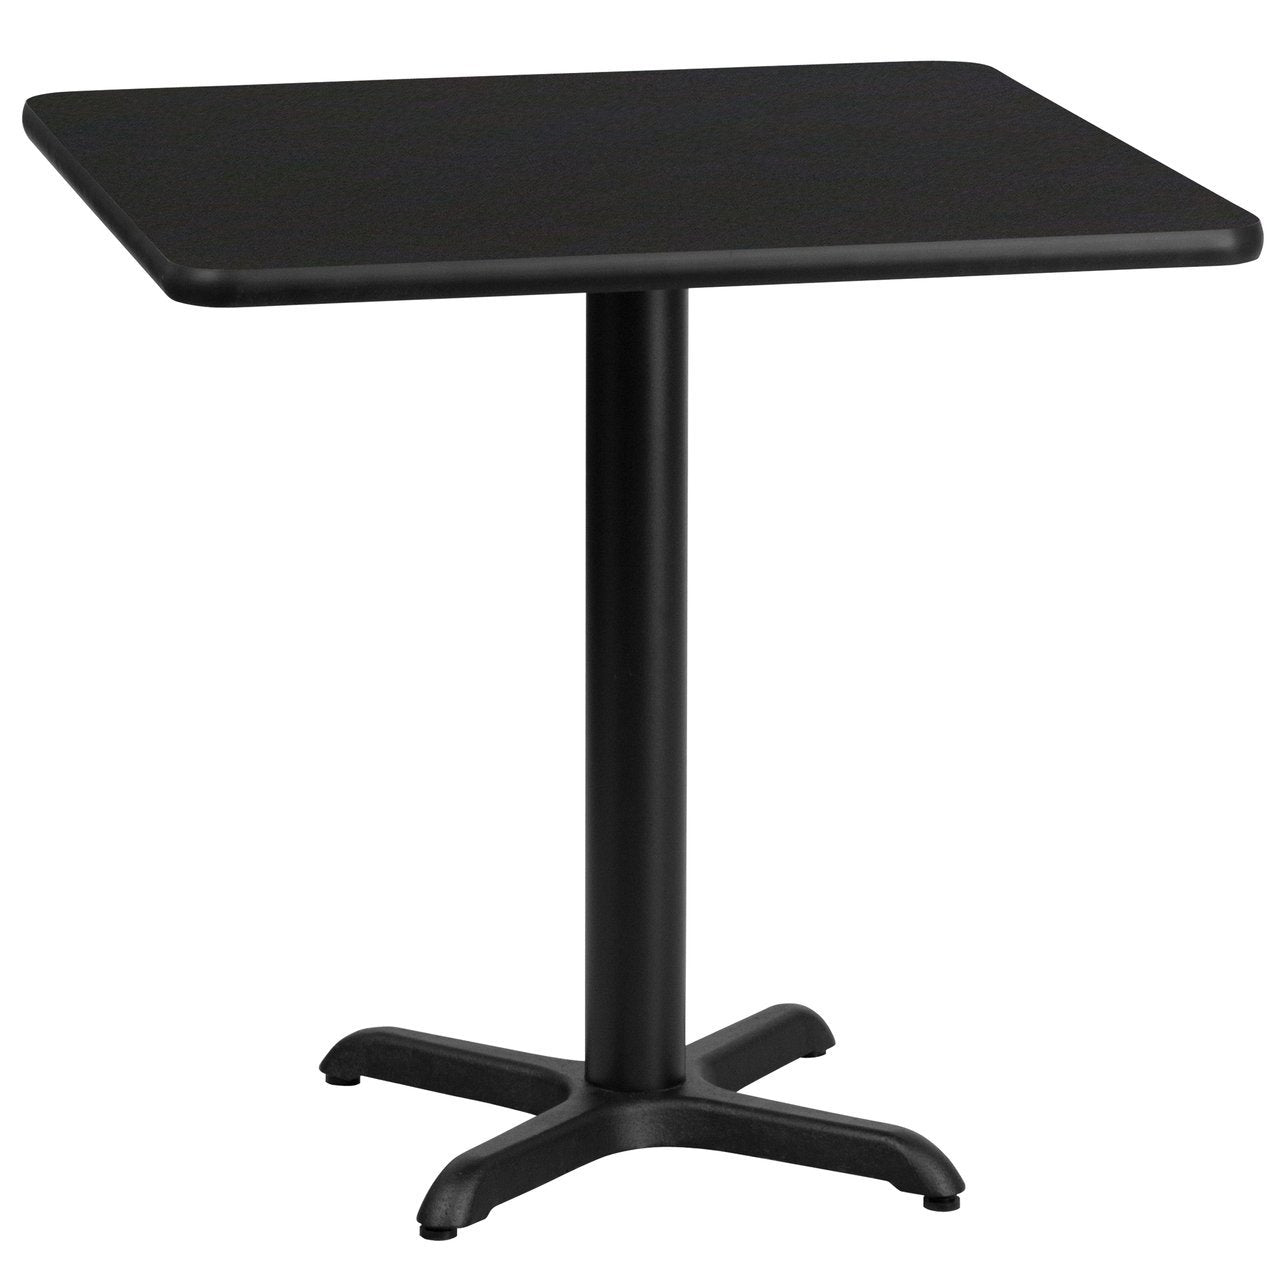 TABLE AND BASE - REGULAR HEIGHT